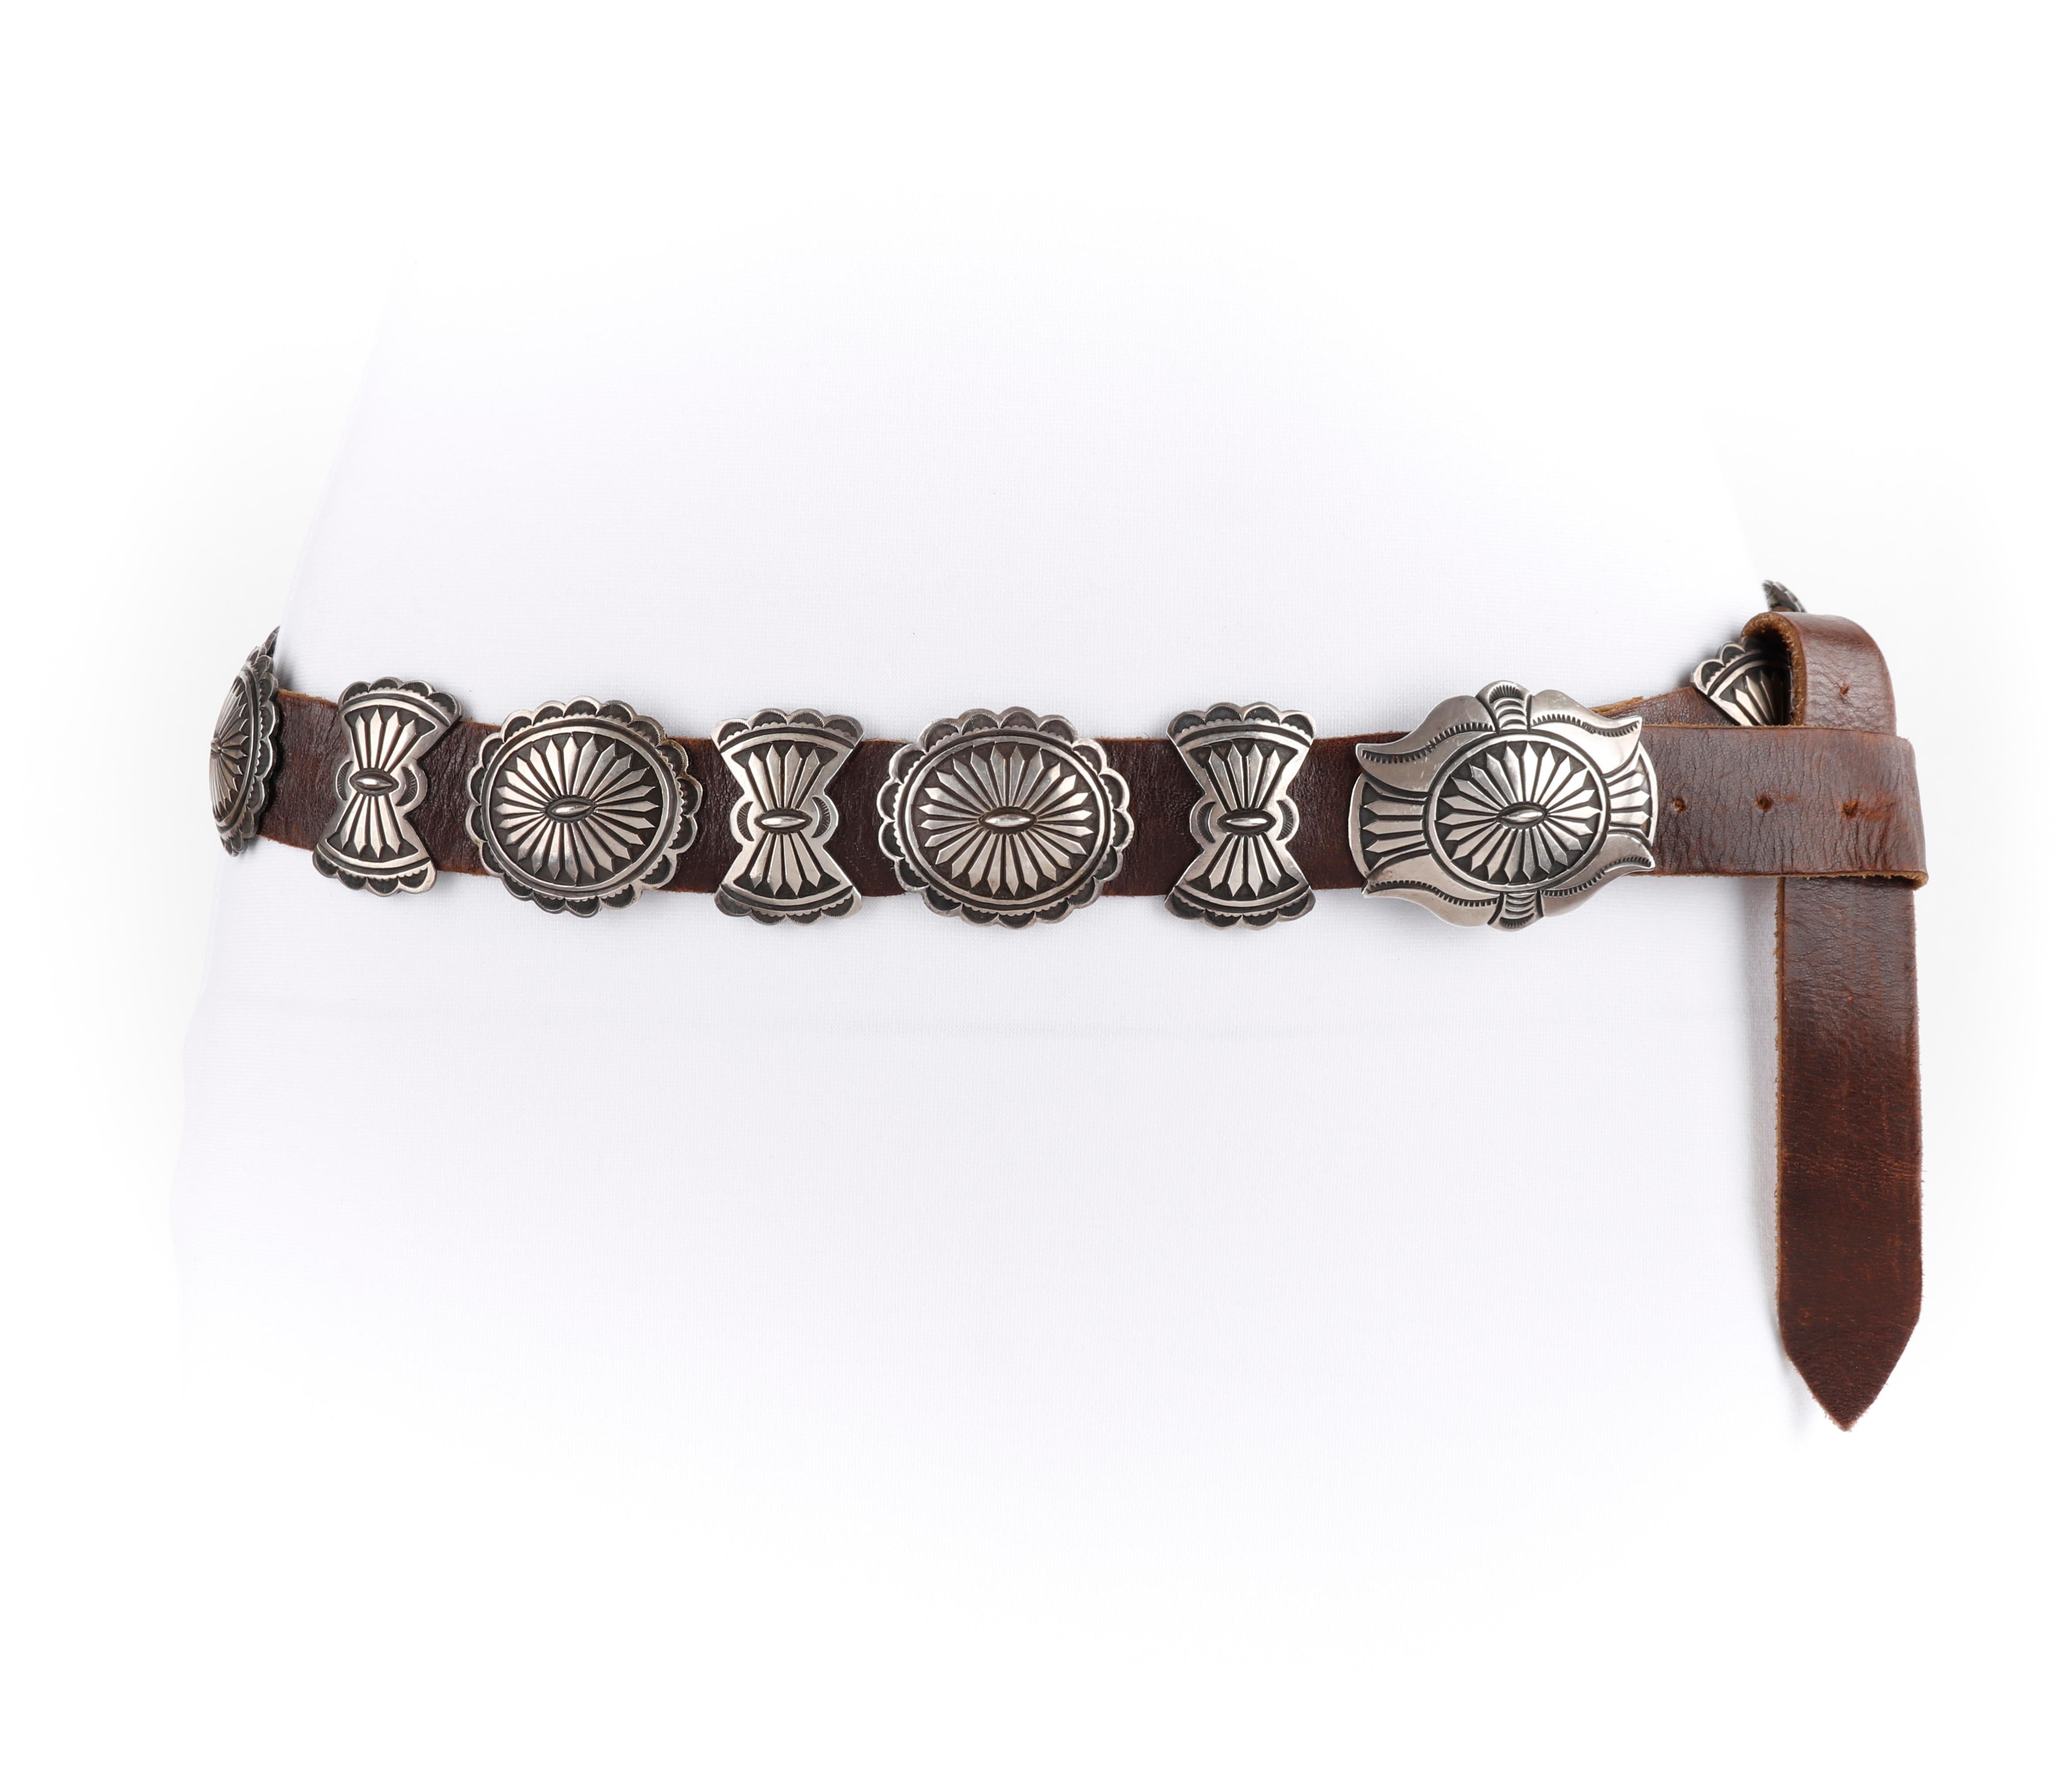 CALVIN MARTINEZ c.1980s Sterling Silver Handmade Traditional Navajo Concho Belt
 
Circa: 1980’s 
Label(s): C. MTZ
Designer: Calvin Martinez
Style: Concho belt
Color(s): Shades of russet brown (belt); silver (conchos)
Marked Fabric Content: Sterling